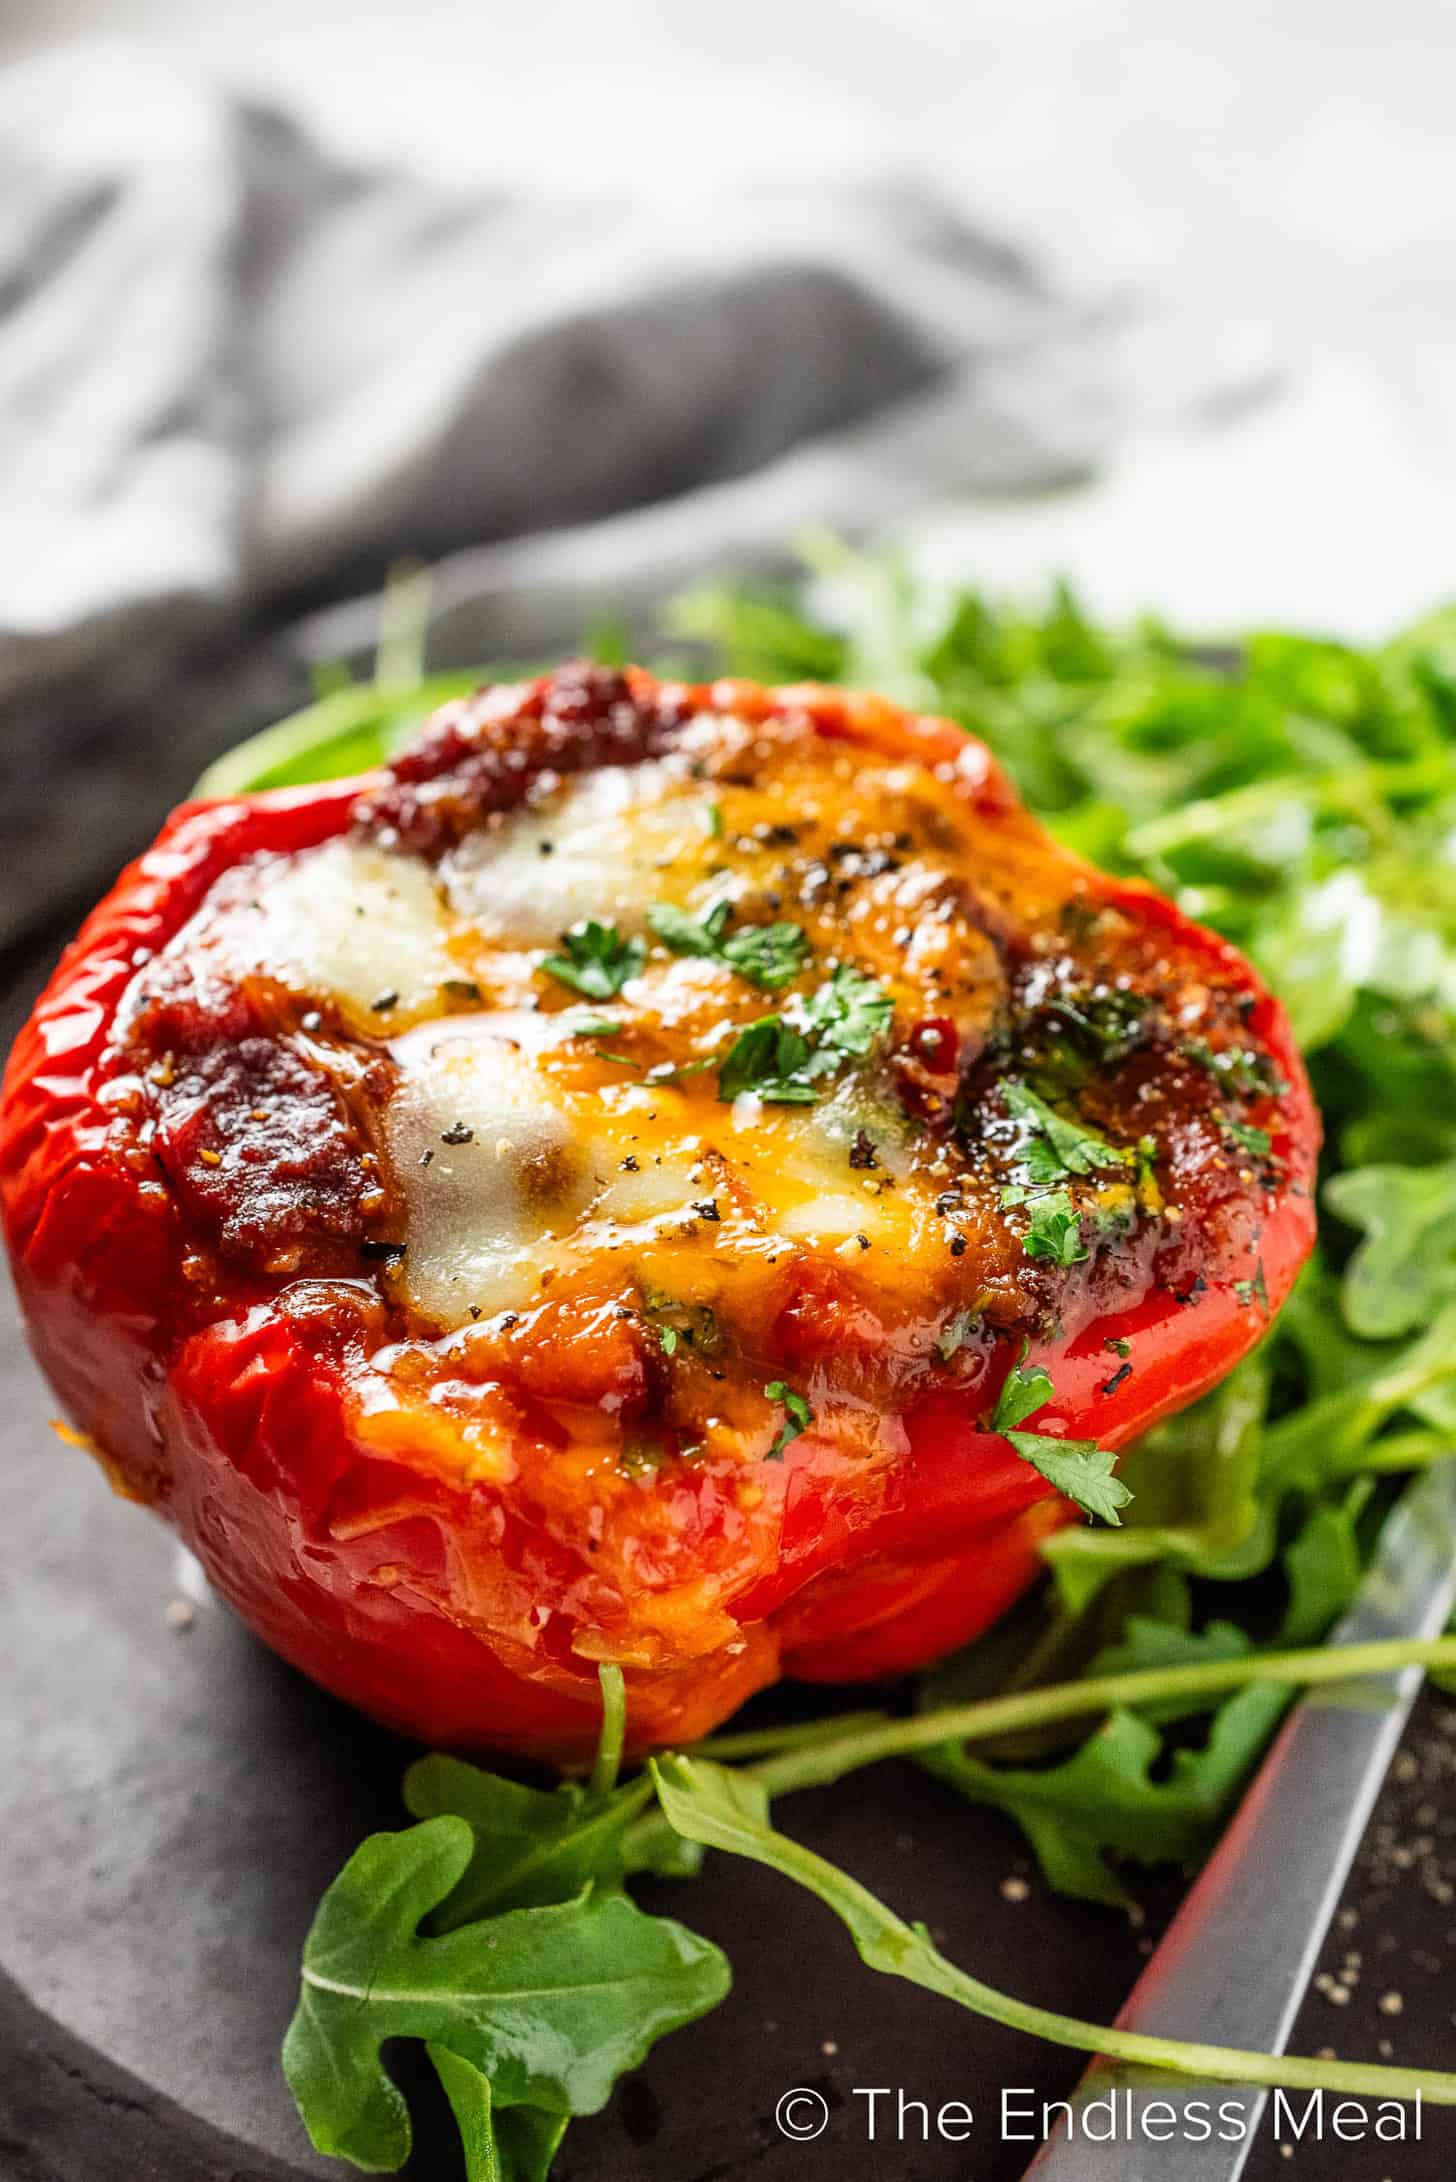 A Chili Stuffed Pepper on a dinner plate